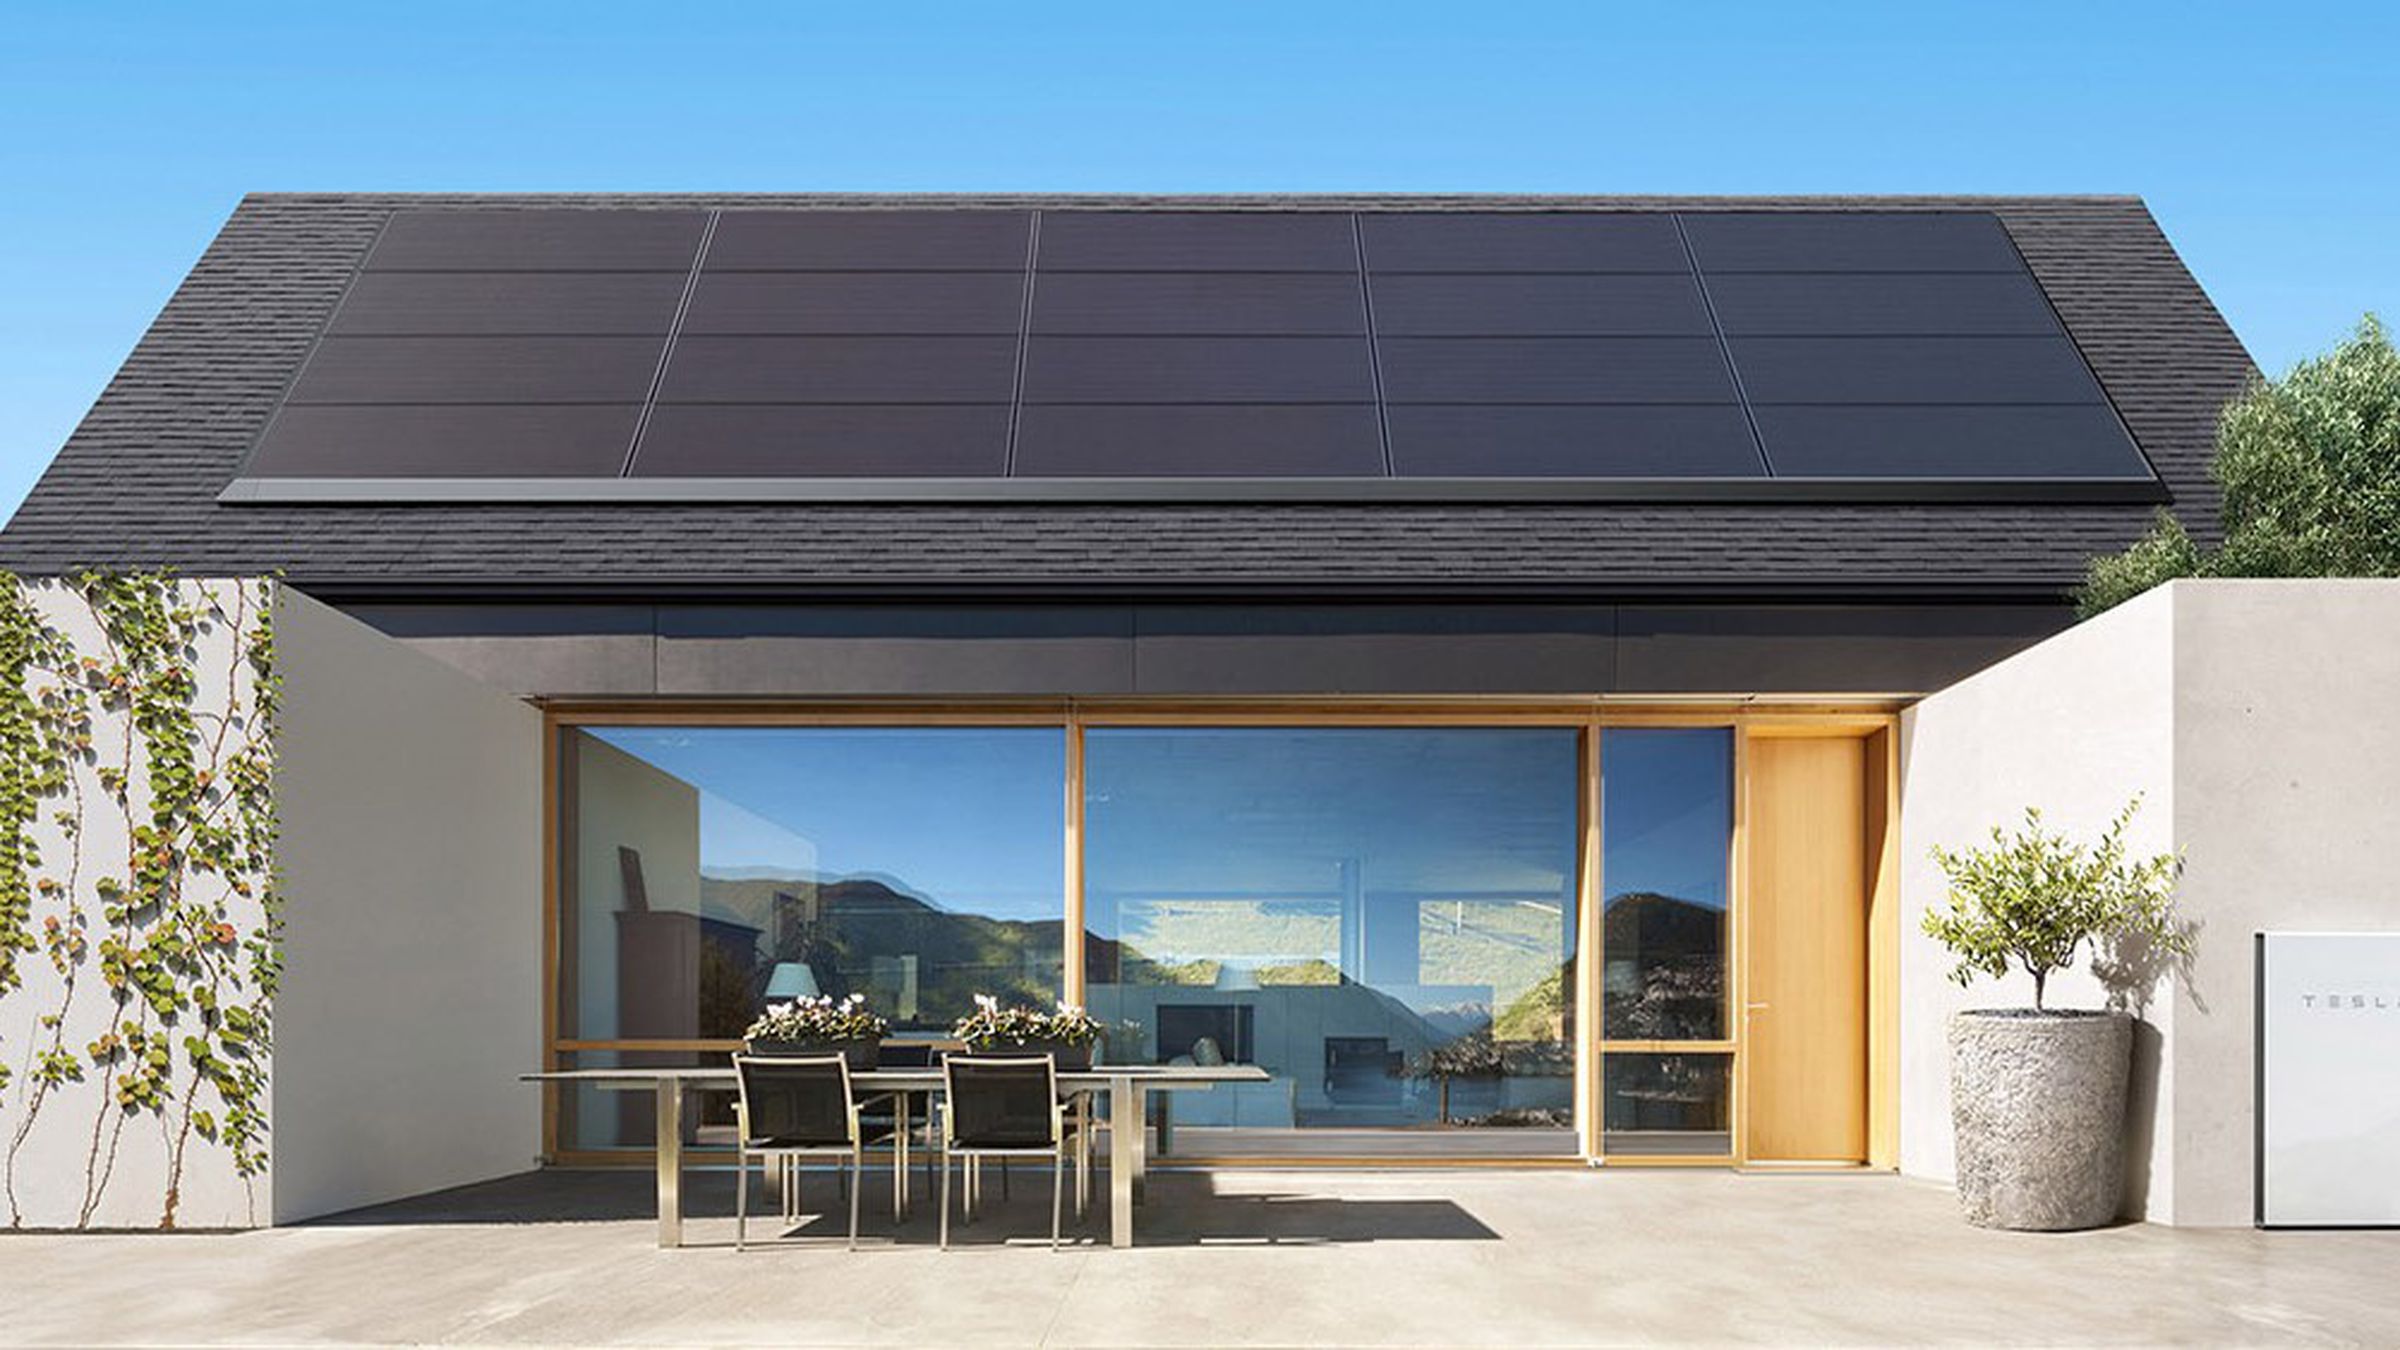 Most of Tesla’s existing installations consist of traditional solar panels.